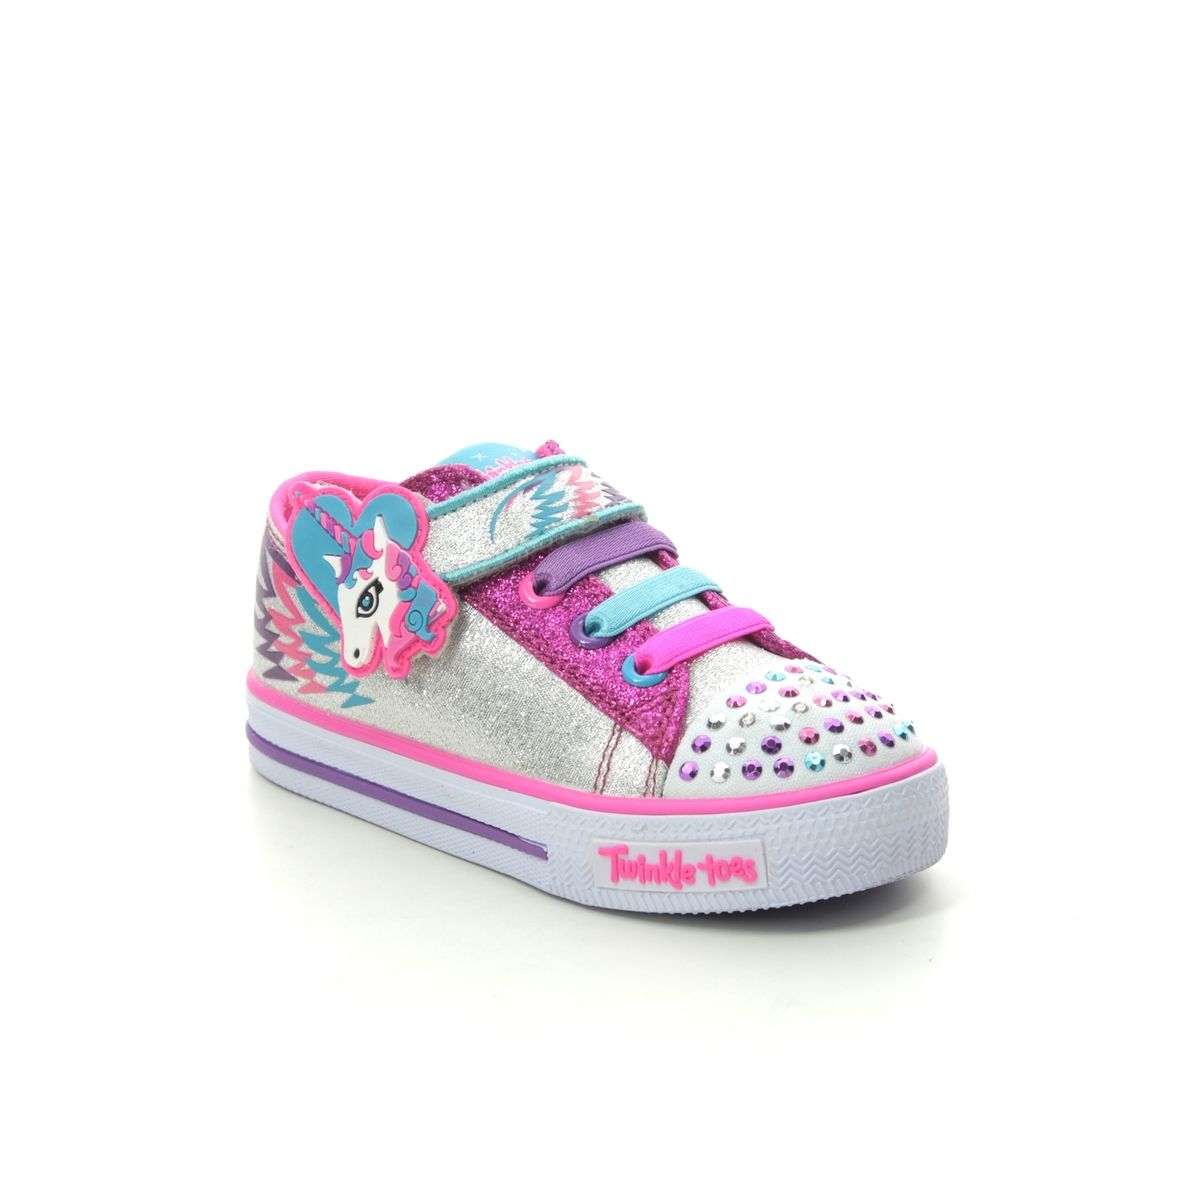 Skechers Party Pets SLHP Silver hot pink Kids girls trainers 10772N in a Plain  in Size 26